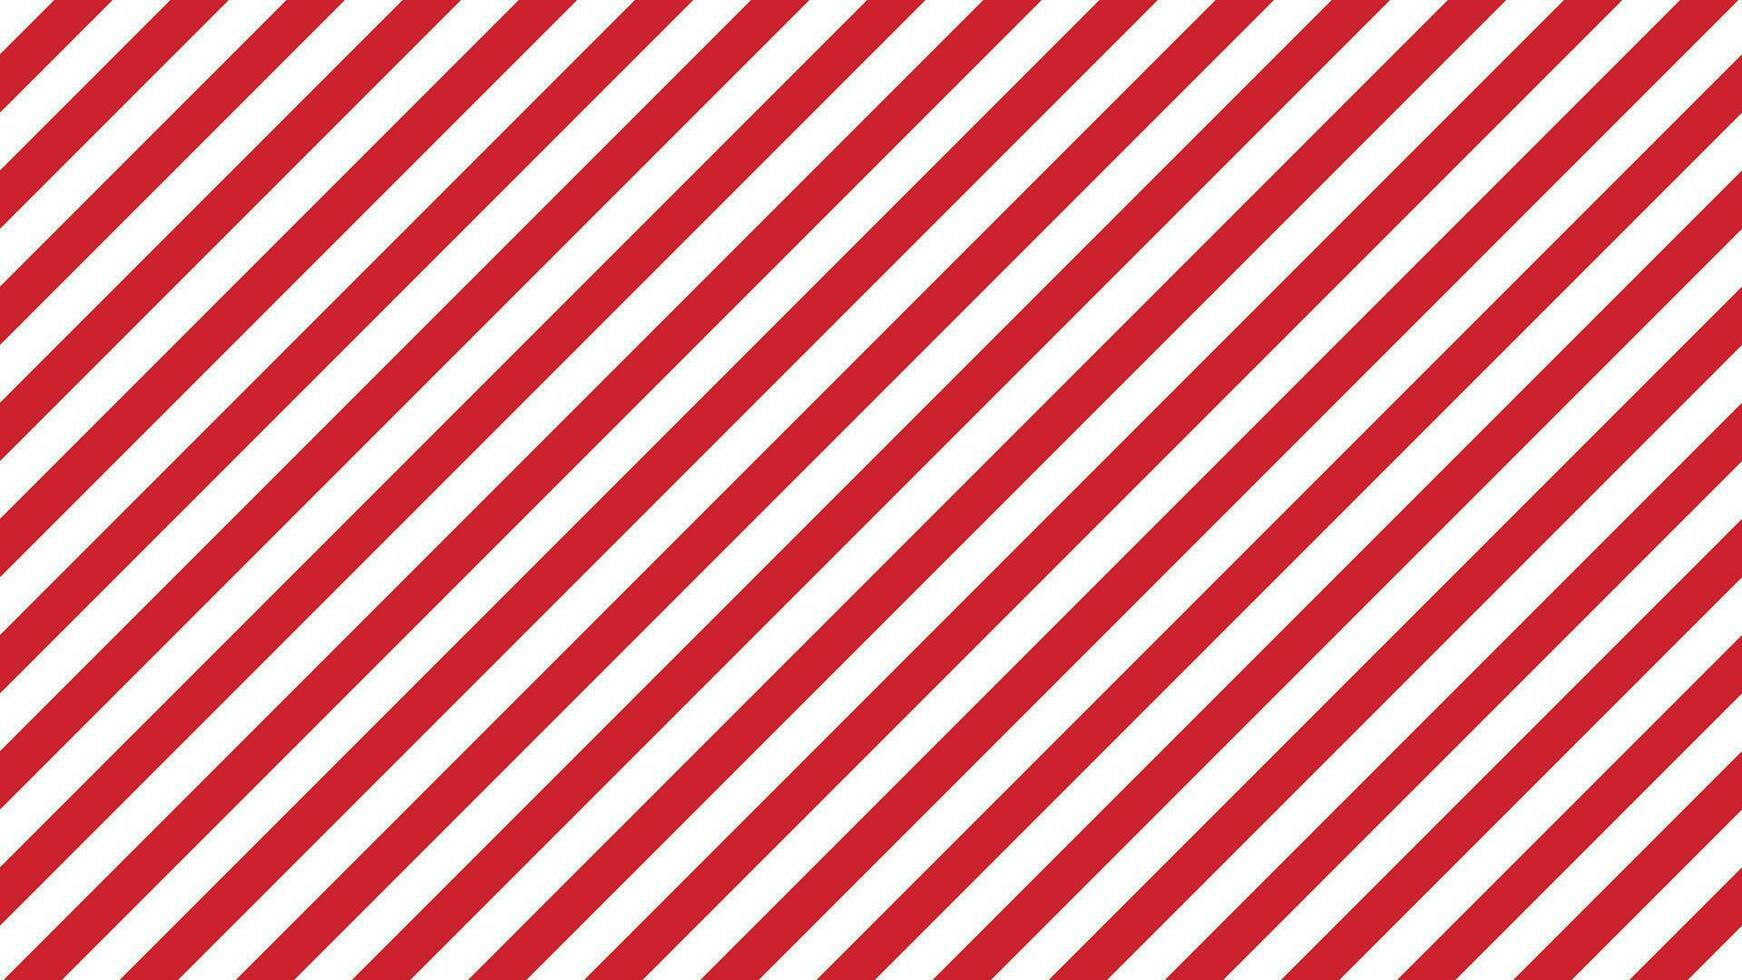 Simple Blank Seamless Red Stripes Vector Background